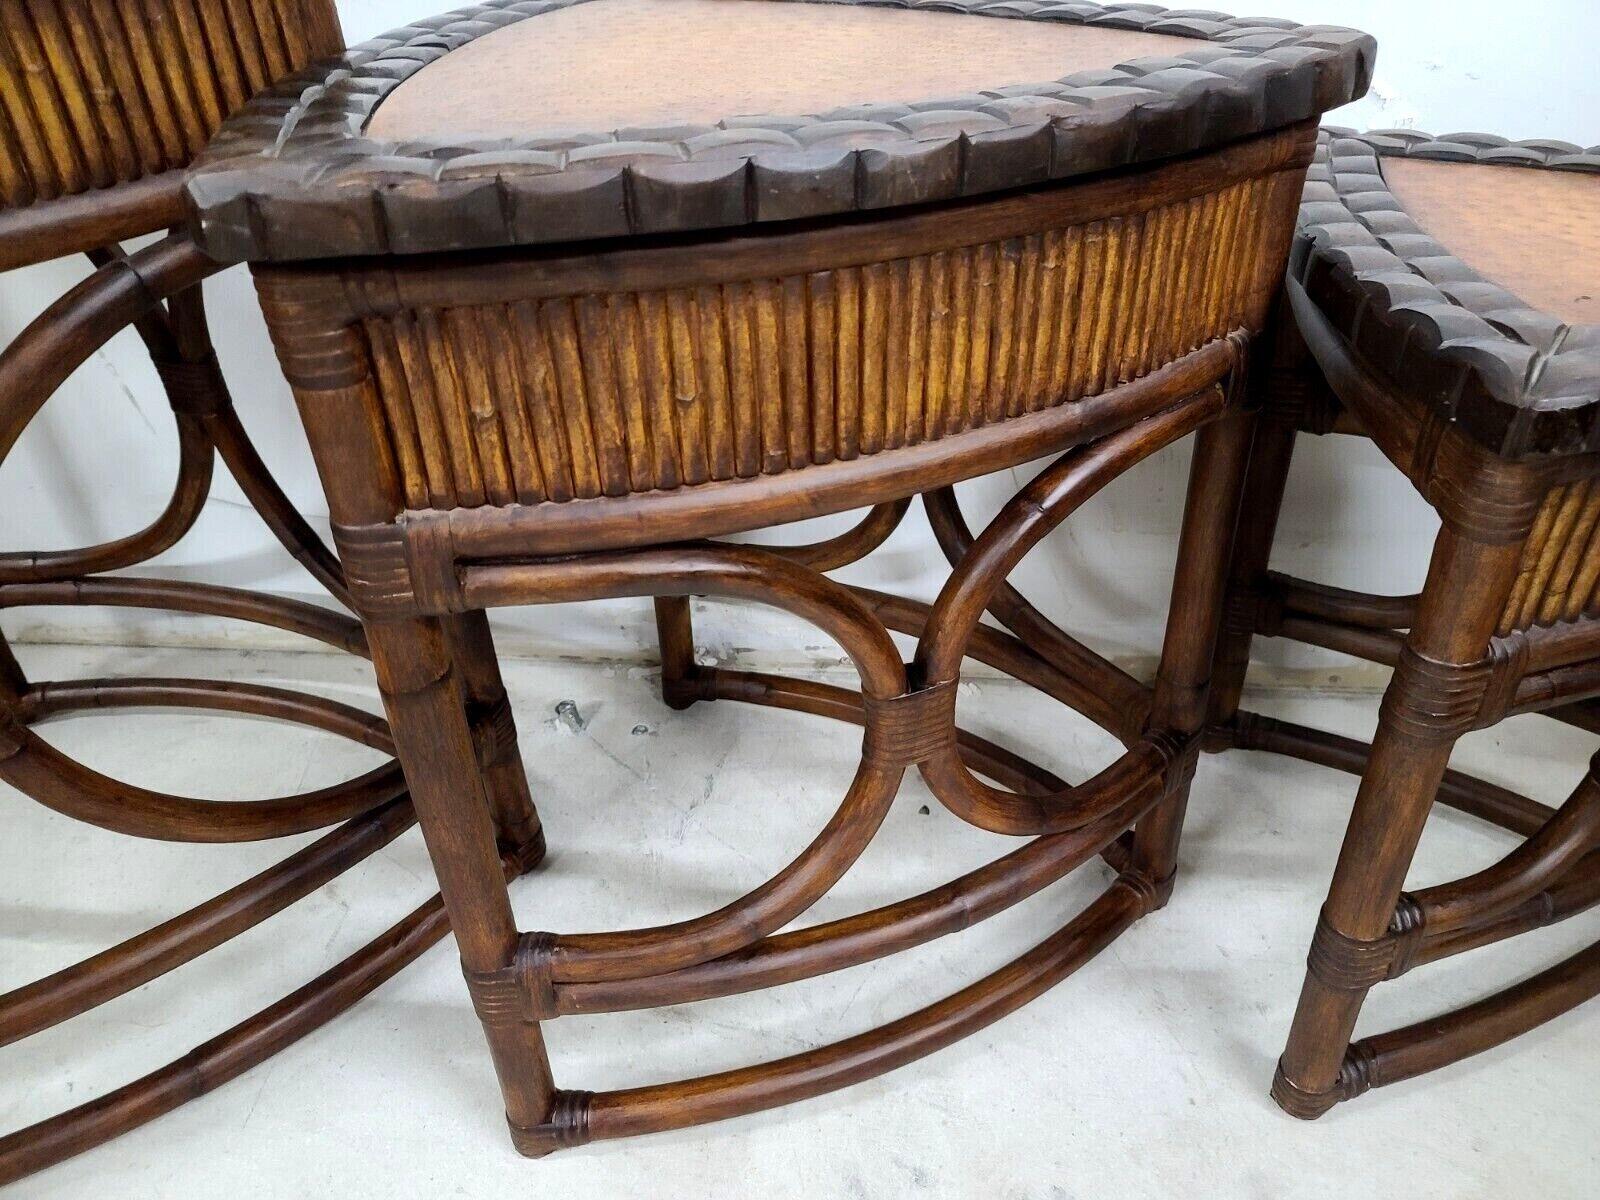 Vintage Bamboo Rattan Coconut Shell Ostrich Nesting Tables, Set of 3 For Sale 4